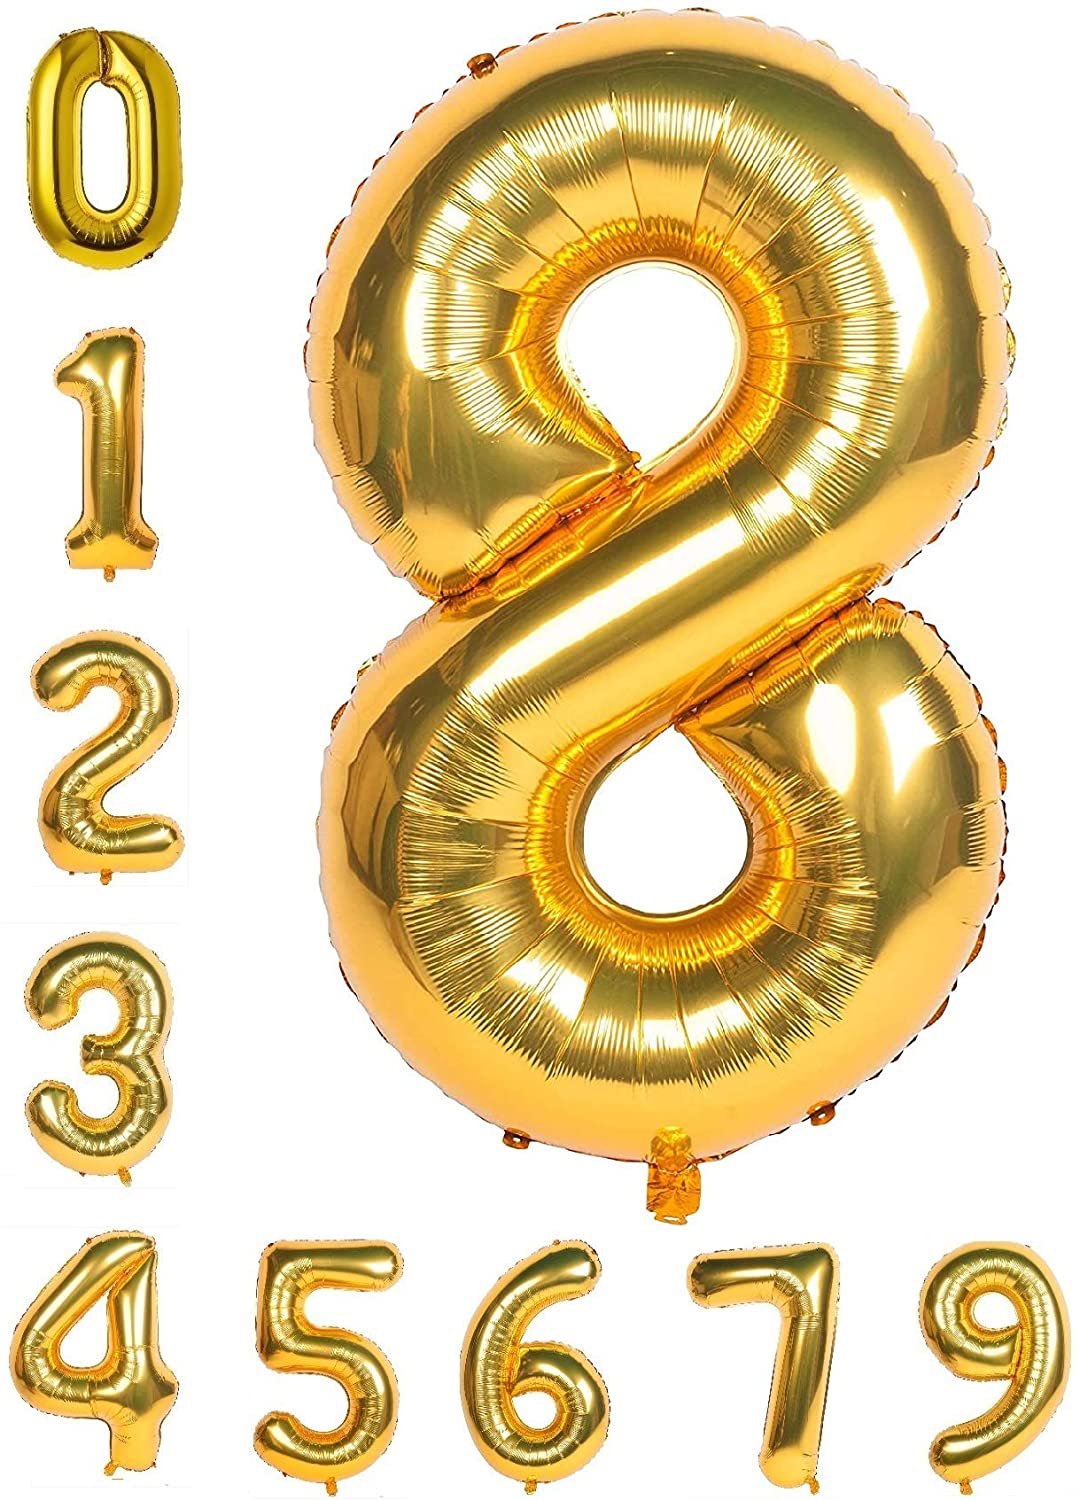 Toylin 40 Inch Gold Large Numbers Balloons 0-9, Number 8 Digit 8 Helium Balloons, Foil Mylar Big Number Balloons for Birthday Party Anniversary Supplies Decorations